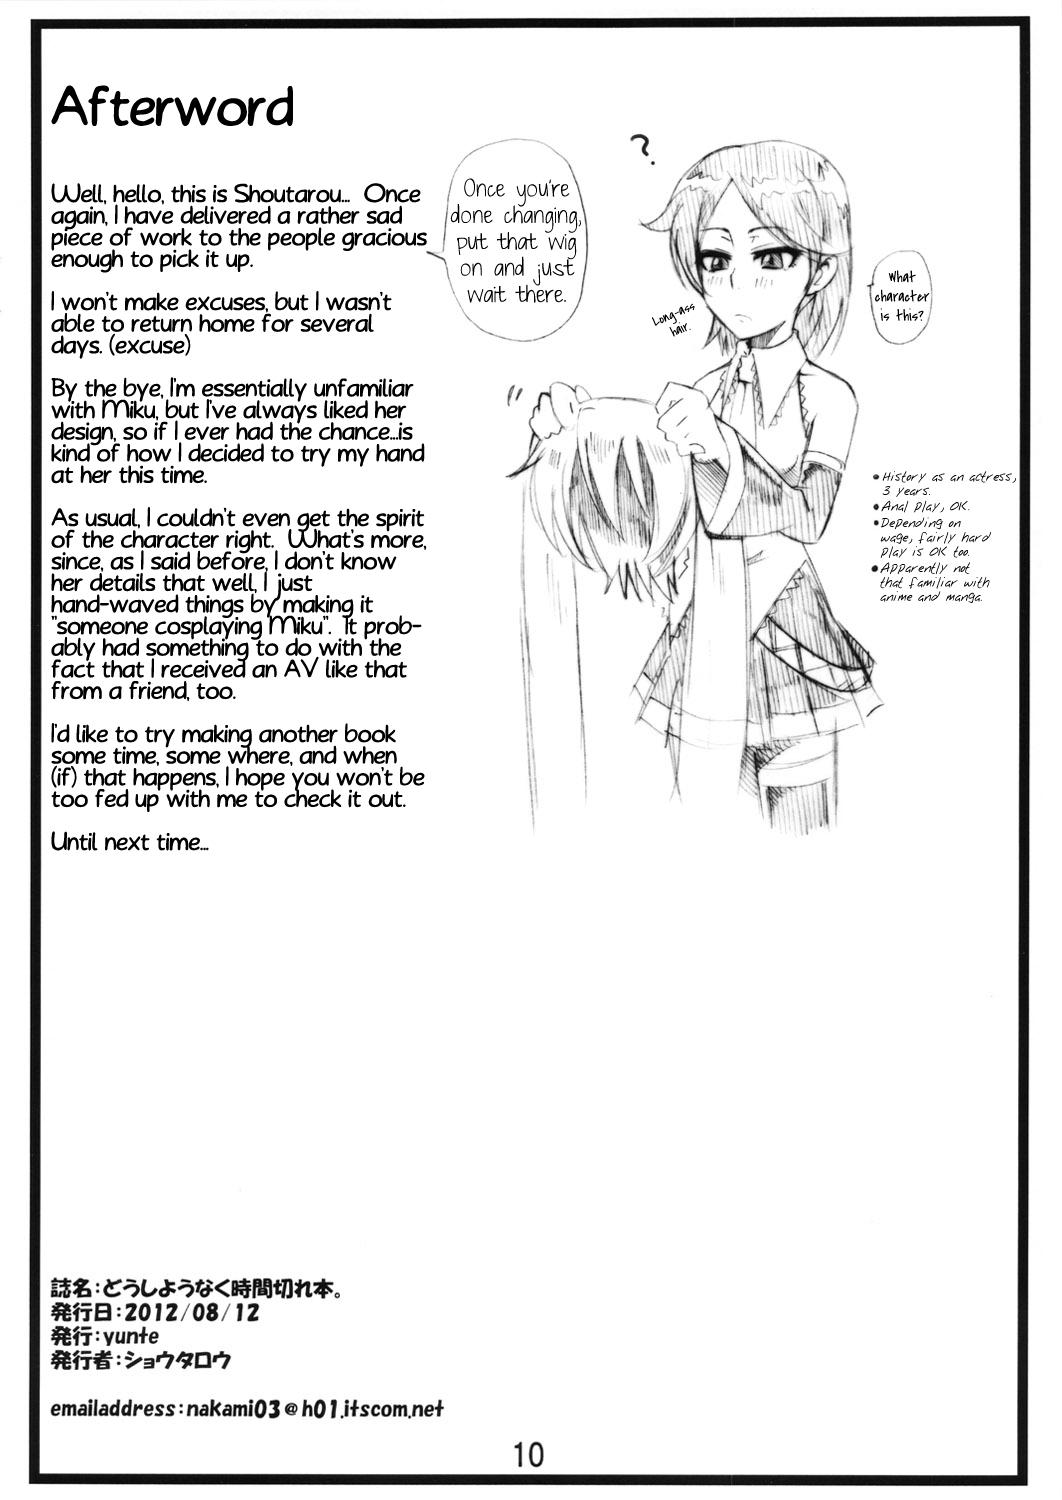 Asshole Doushiyoumo Naku Jikan Gire Hon. | Hopelessly Out of Time Book. - Vocaloid Amazing - Page 9